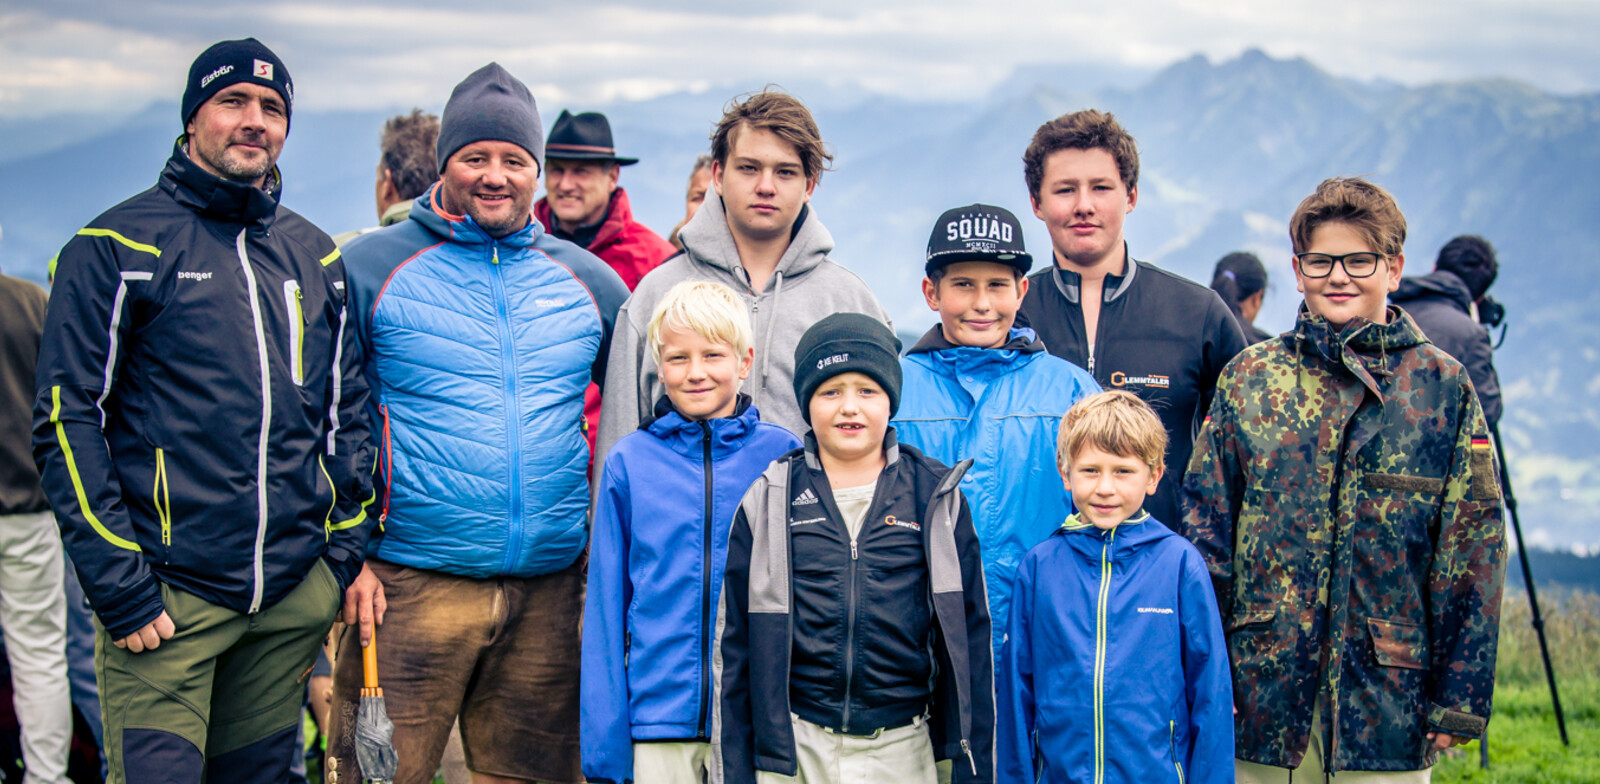 Ranggel-youngsters from Saalbach Hinterglemm with trainer Heli Kendler. | © Edith Danzer